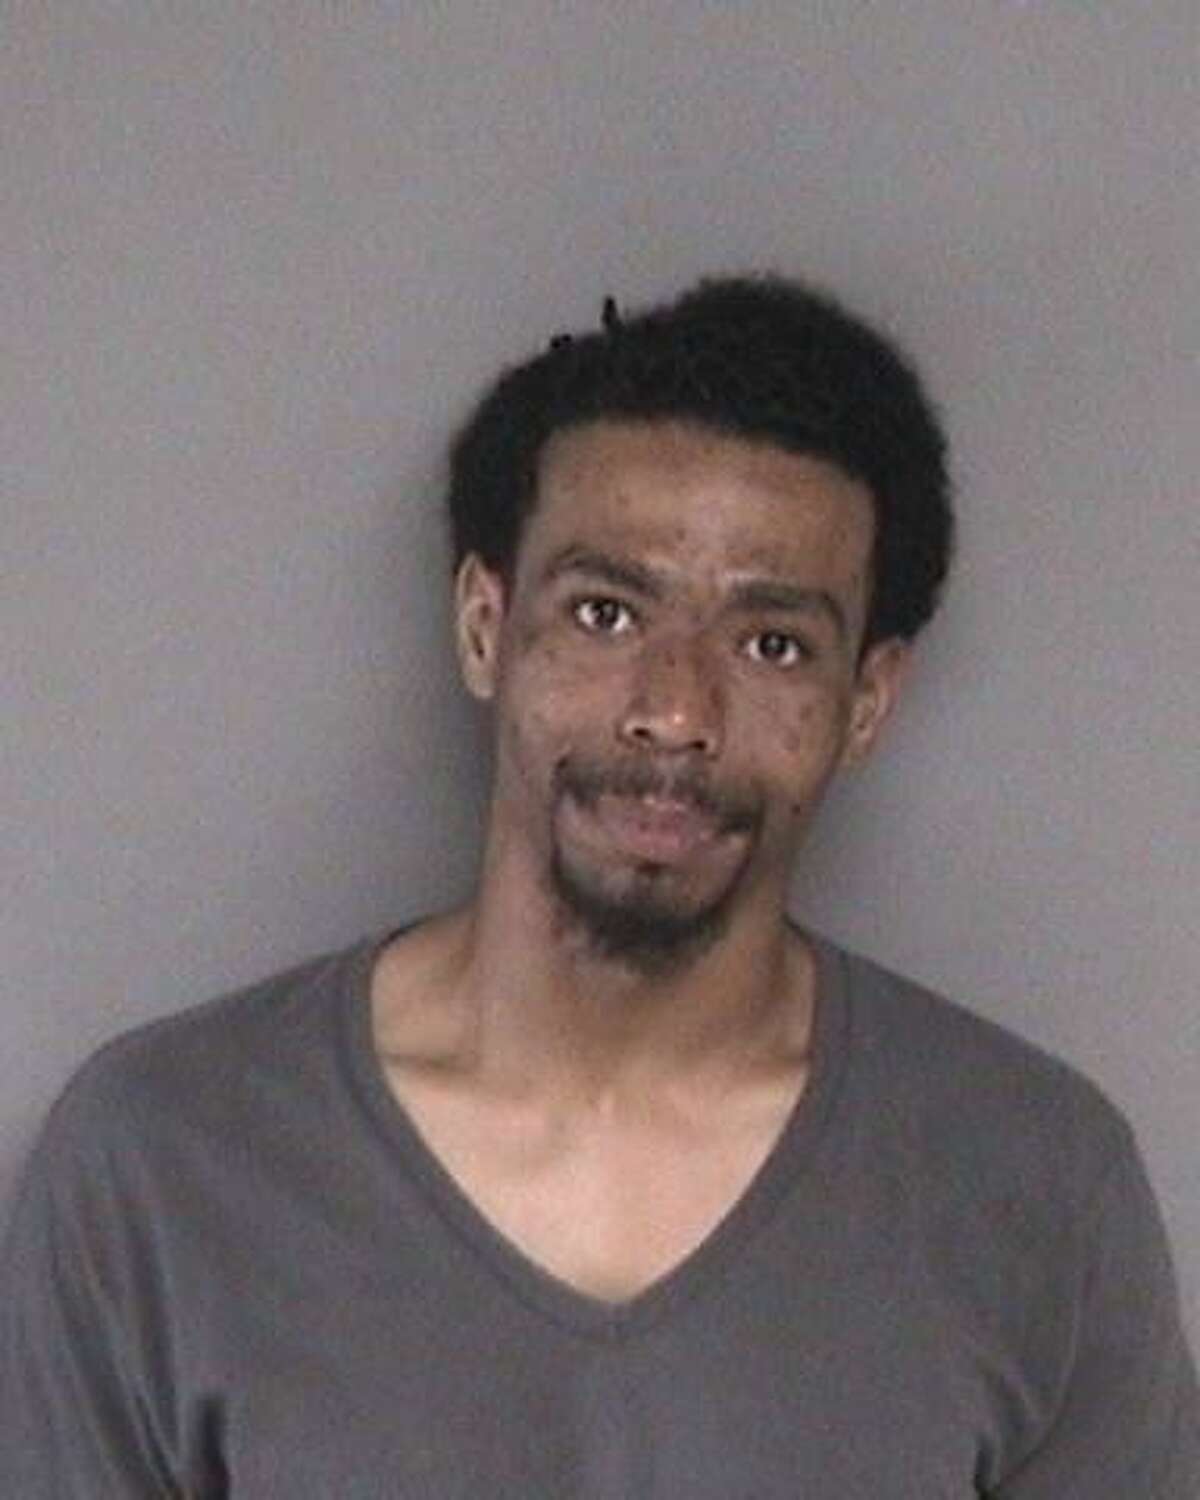 BART Police believe the suspect of Friday's stabbing at MacArthur Station o be Solomon Espinosa. Espinosa is 27 years old, and a transient in the Oakland area.